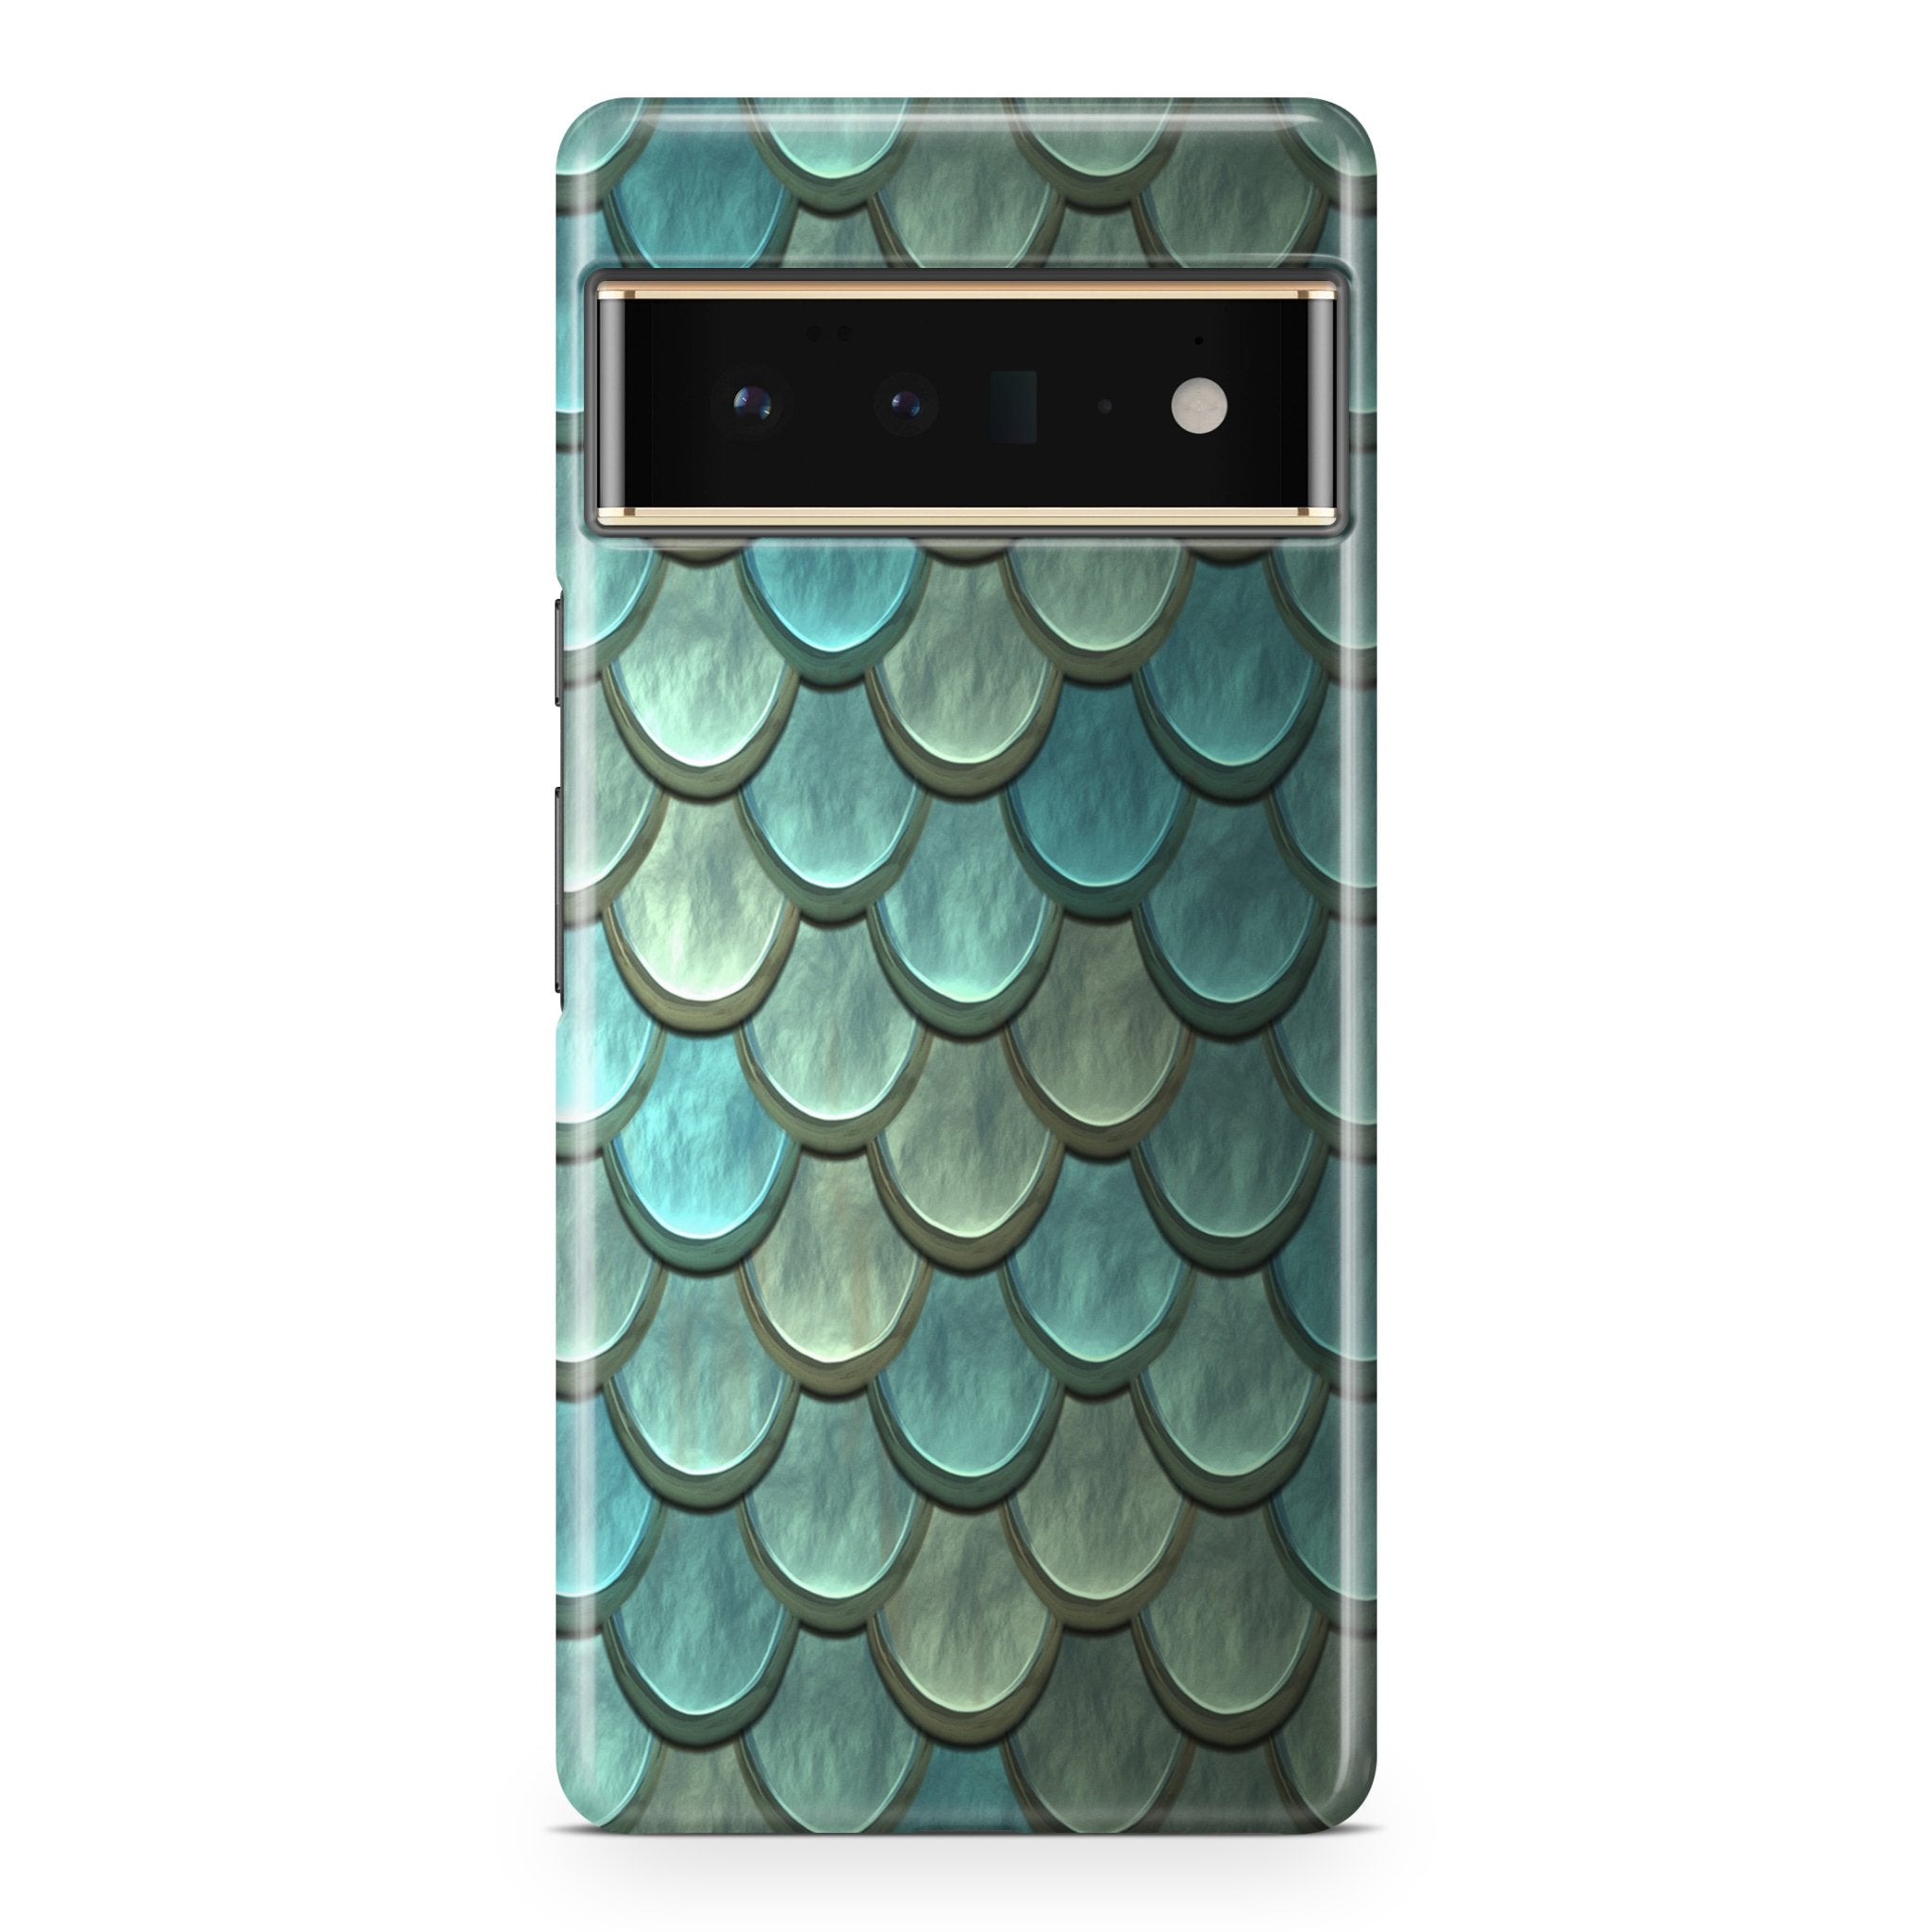 Green Mermaid Scale - Google phone case designs by CaseSwagger